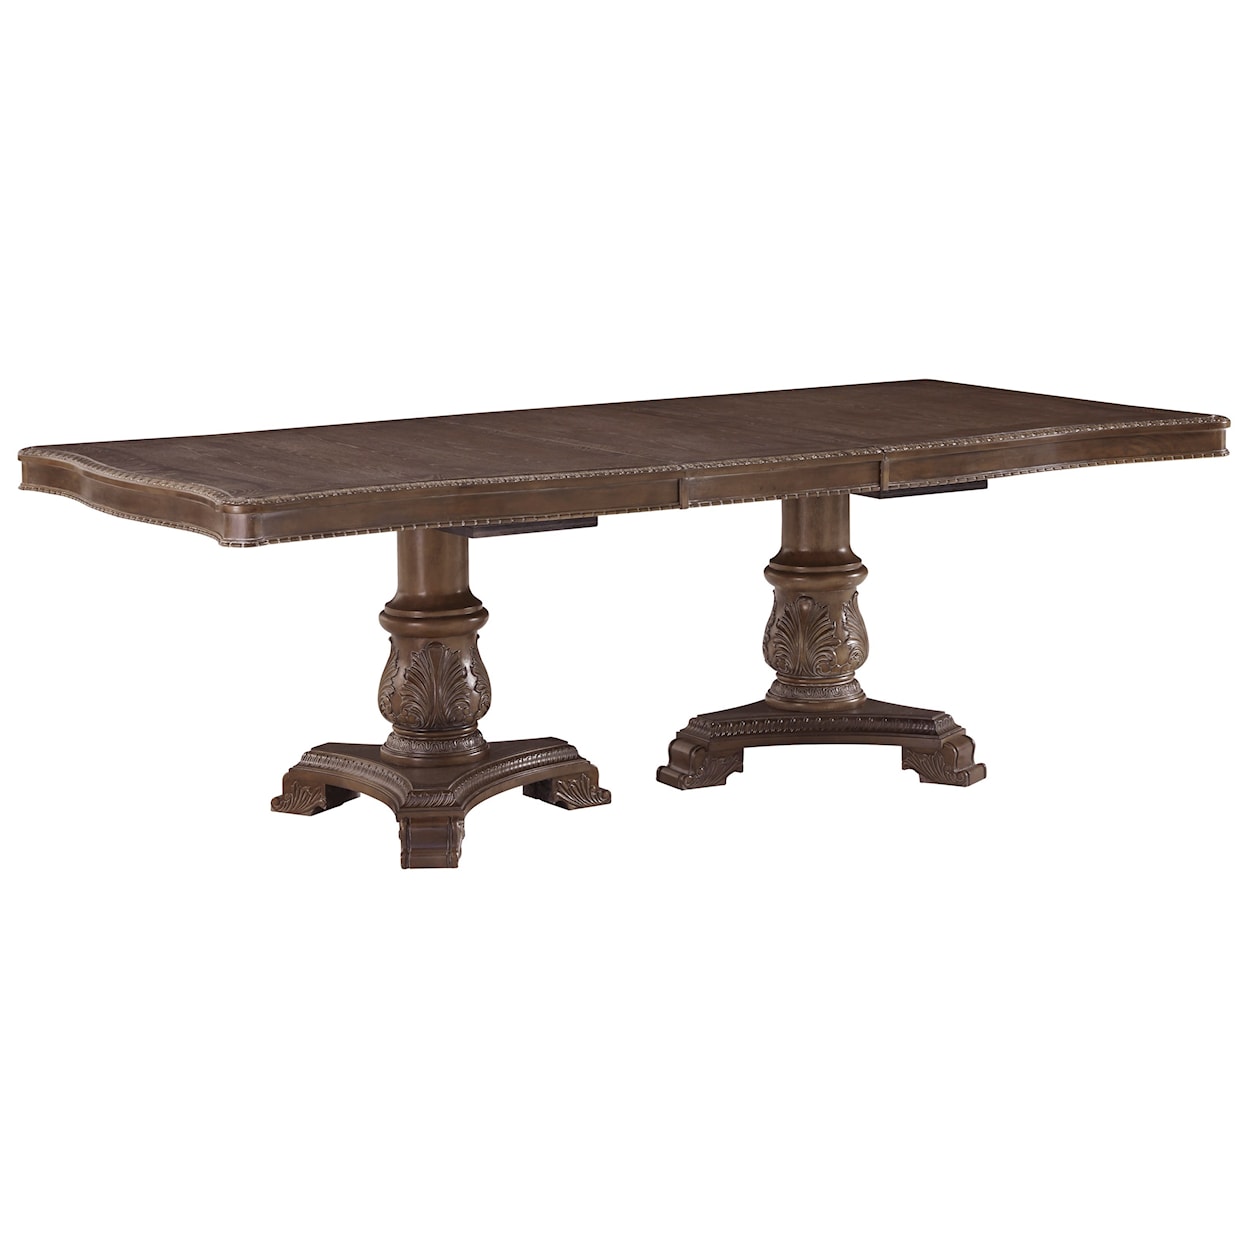 Signature Design by Ashley Serena Rectangular Dining Room Extension Table